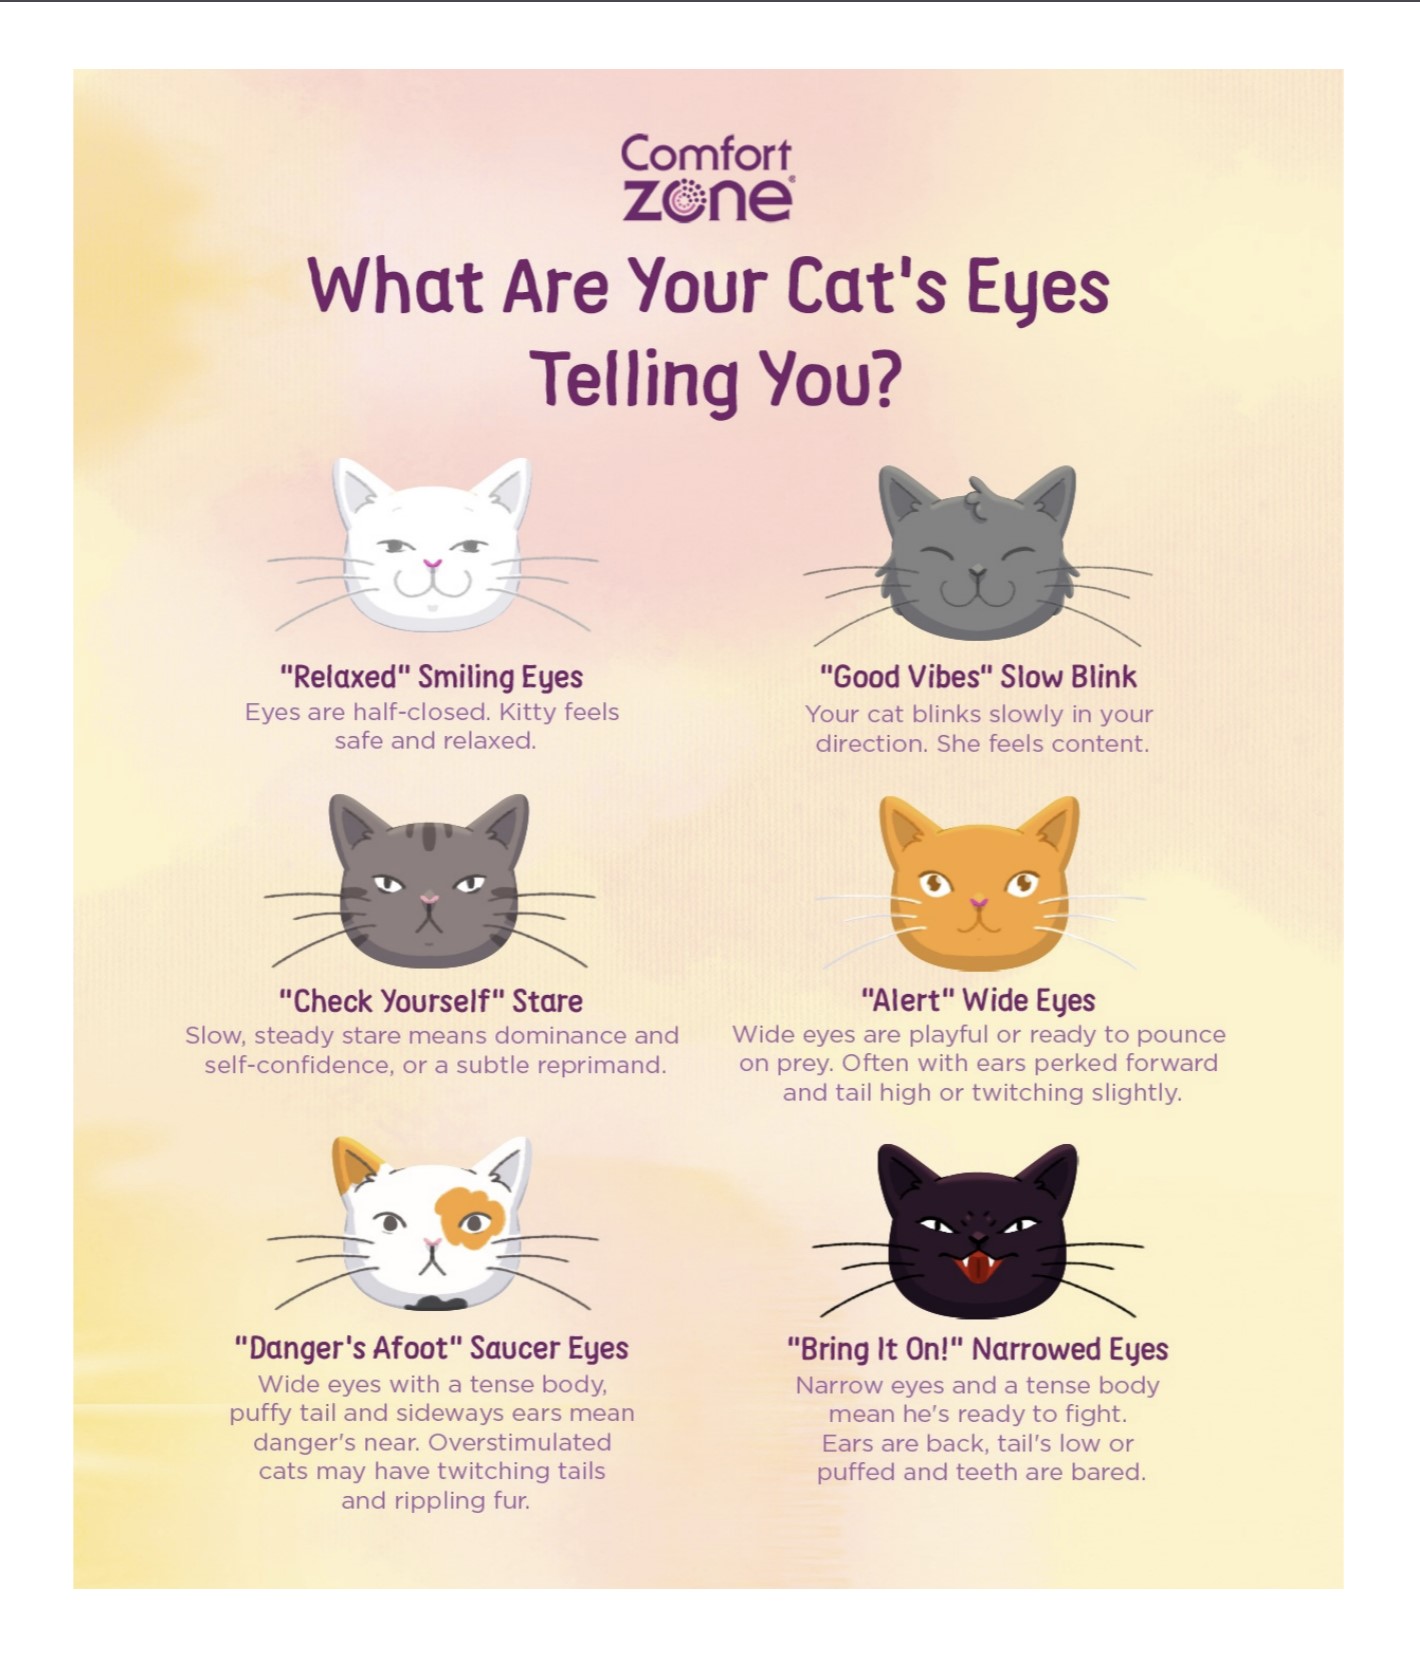 Learn the meaning behind your cat